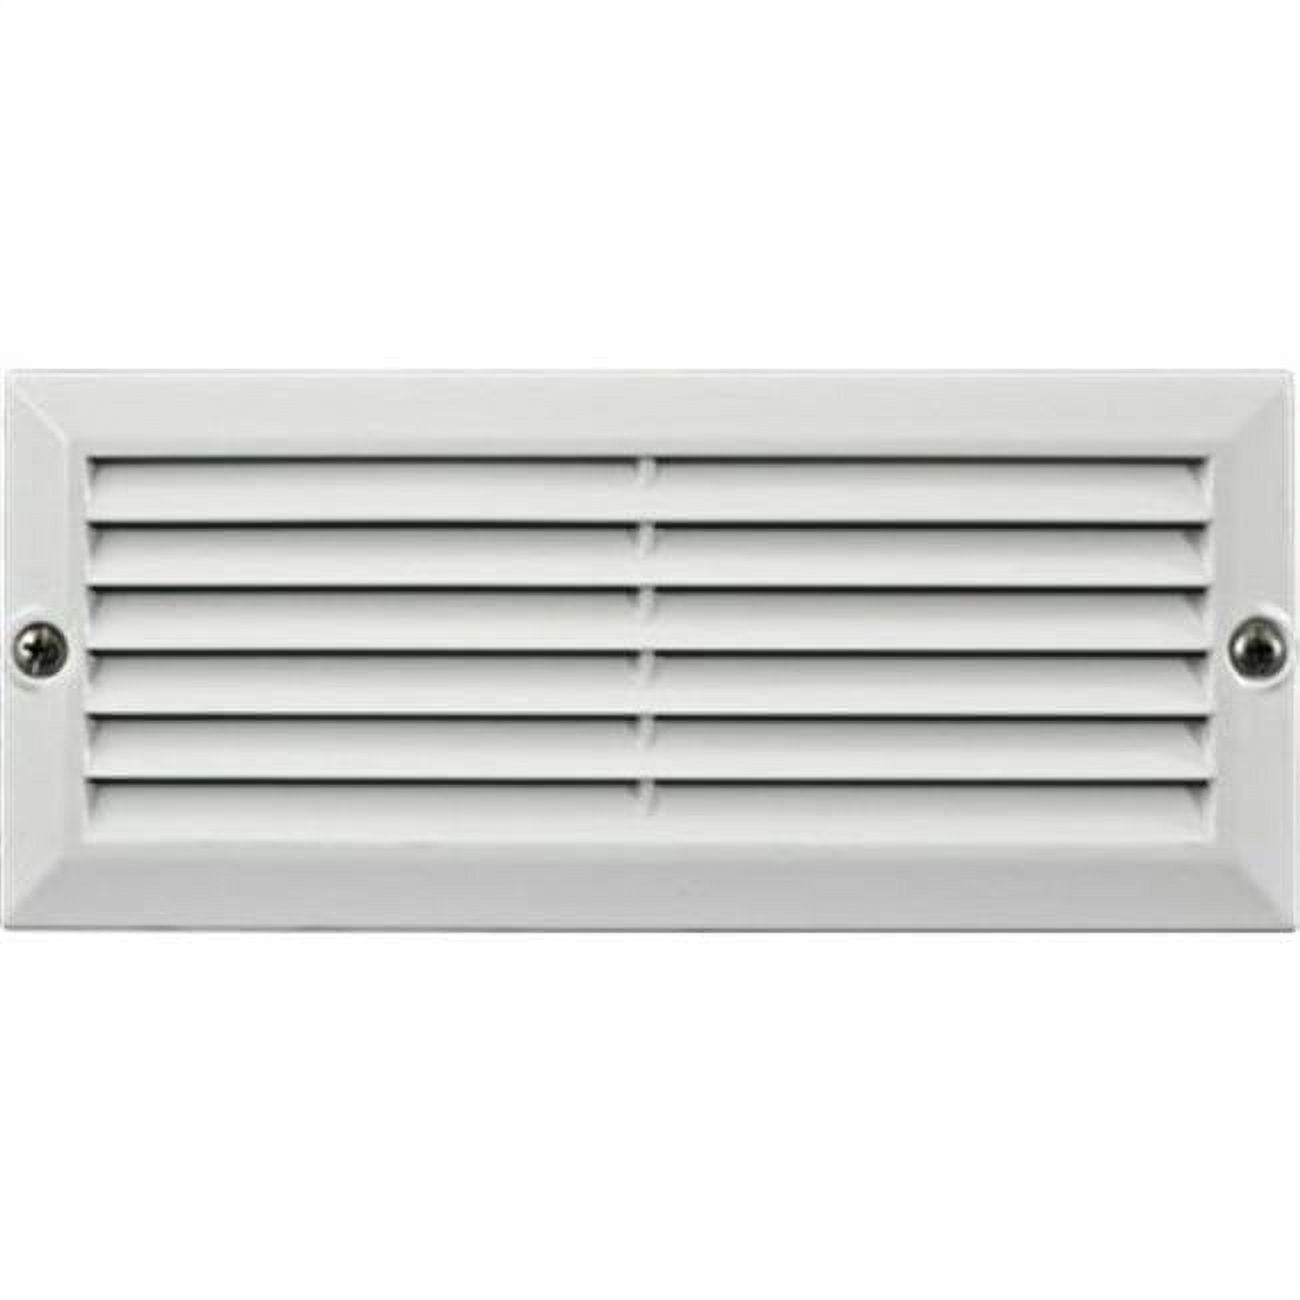 Picture of Dabmar Lighting LV600-W Cast Aluminum Recessed Louvered Brick, Step & Wall Light, White - 3.97 x 9.13 x 3.25 in.